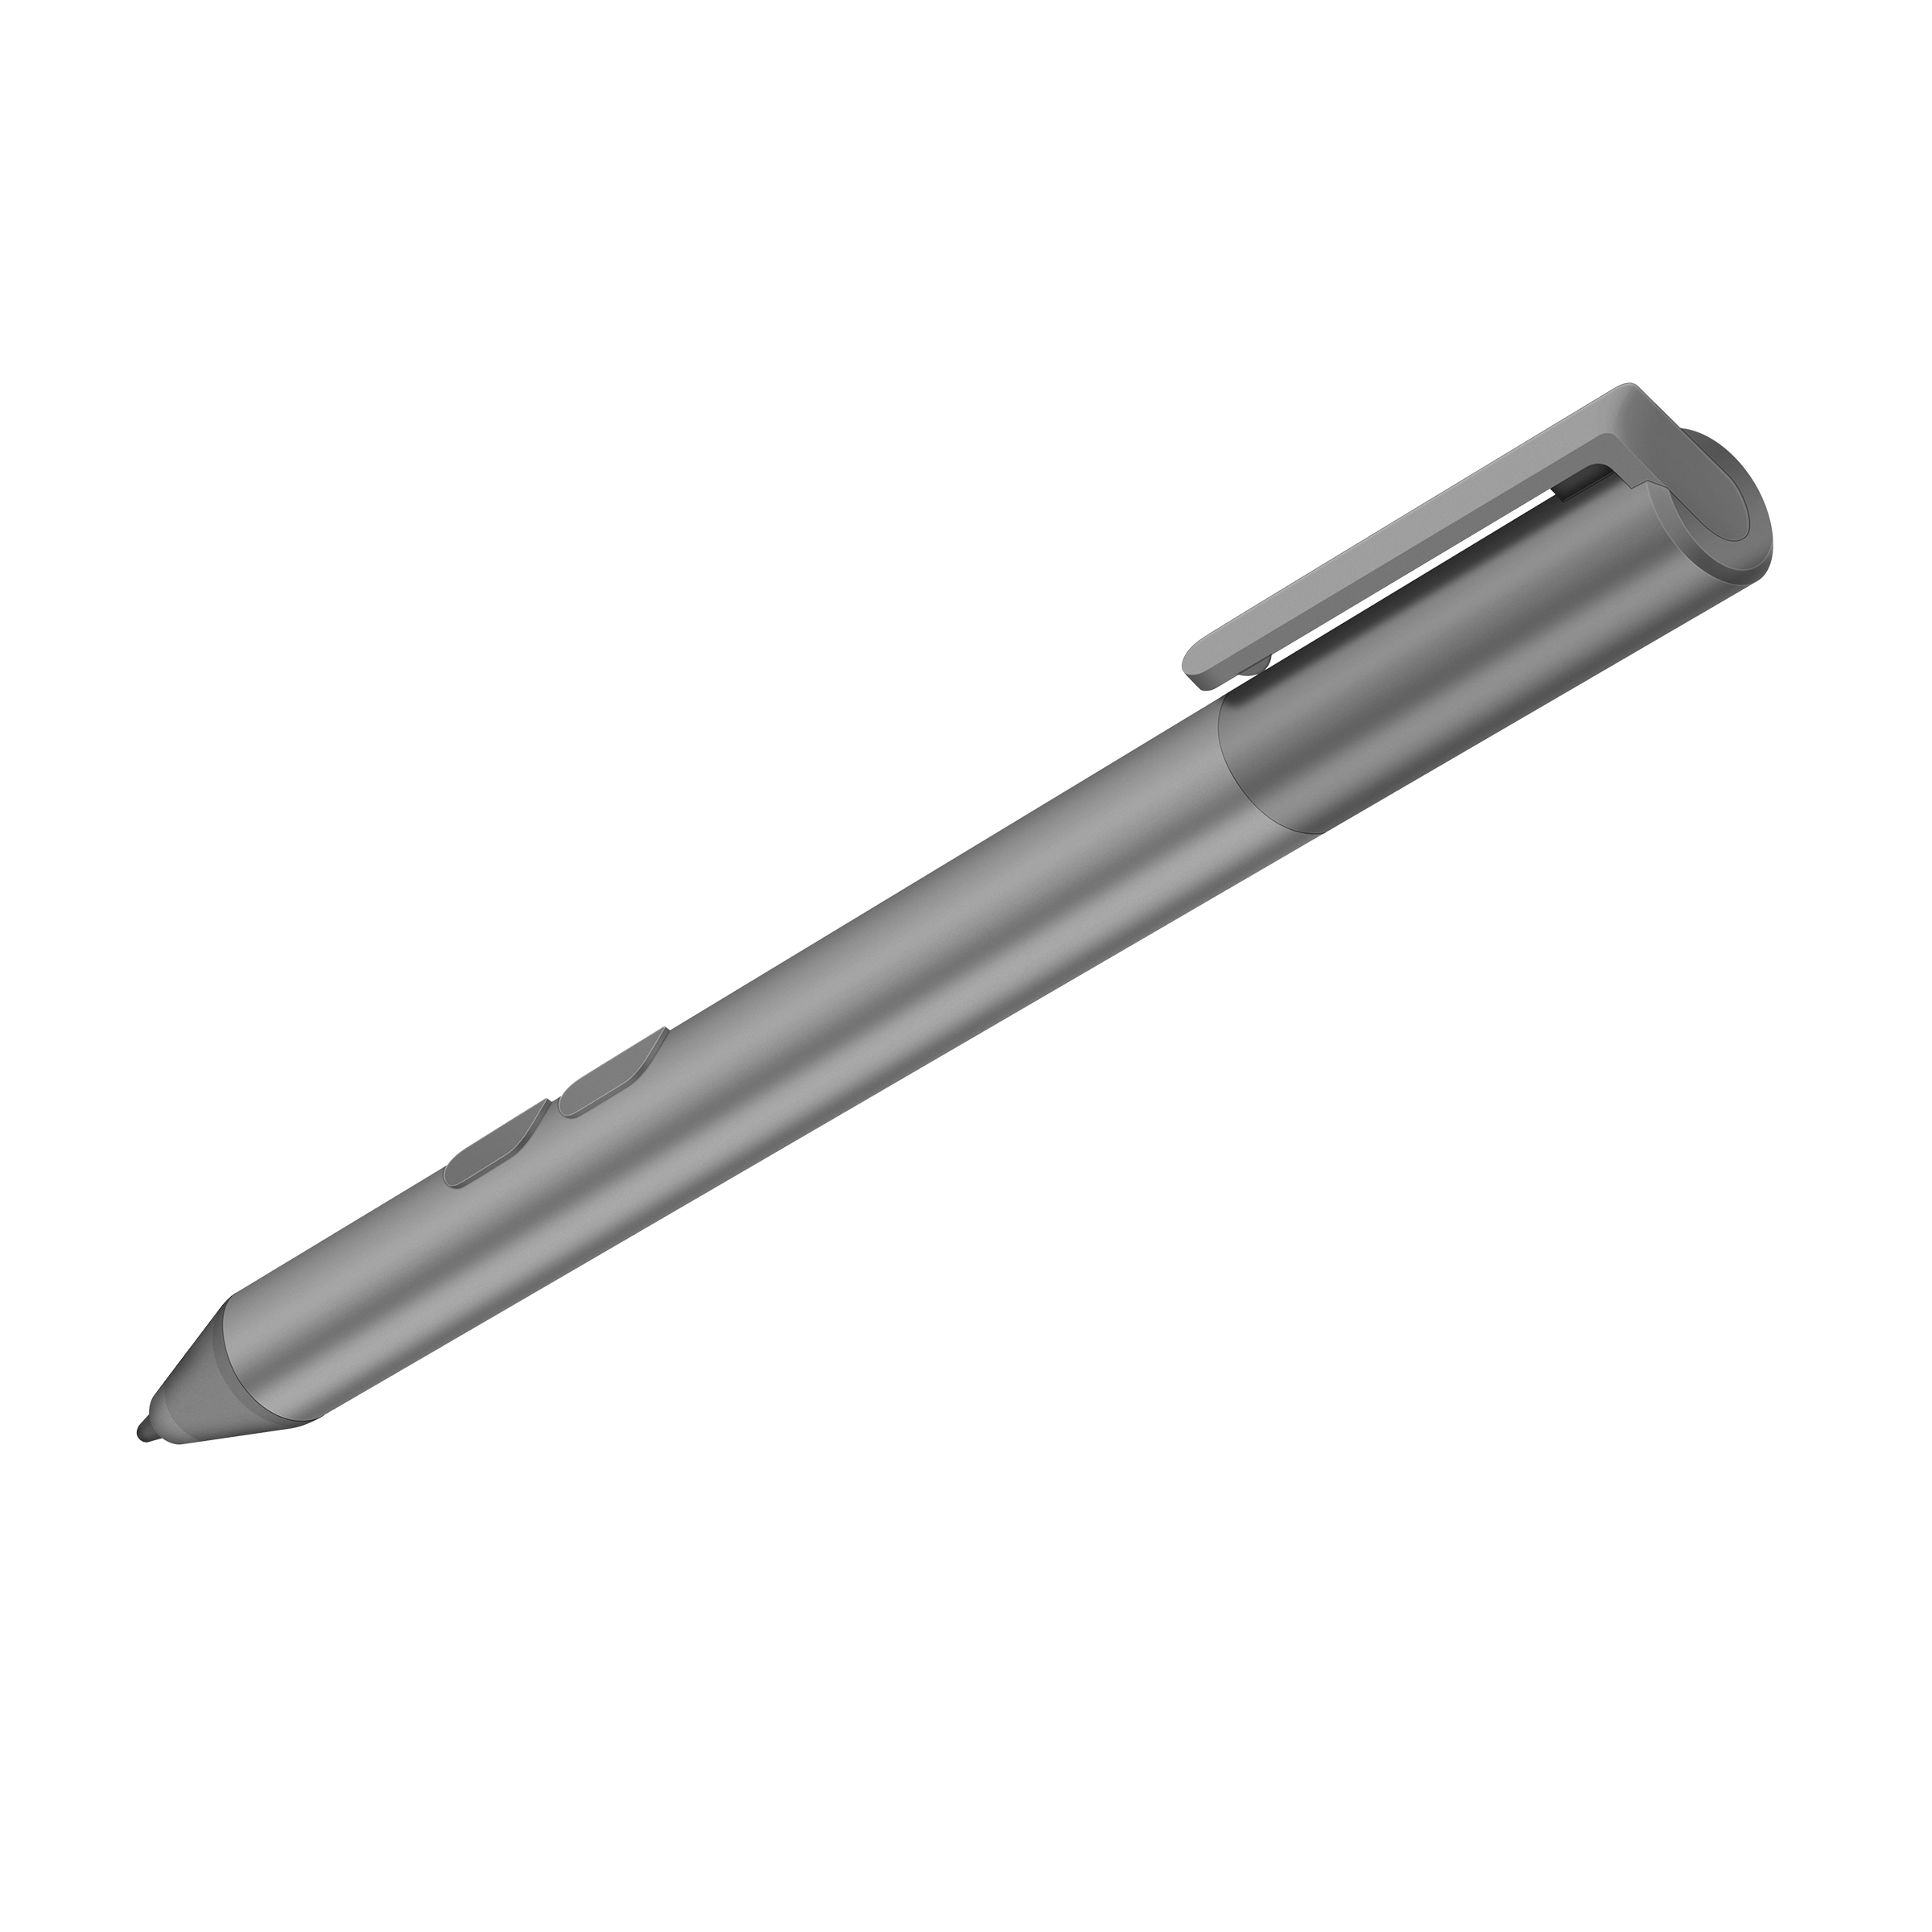 BoxWave Metallic Silver Electronic Stylus with Ultra Fine Tip for ASUS VivoBook Flip 14 TP410UF AccuPoint Active Stylus ASUS VivoBook Flip 14 TP410UF Stylus Pen 